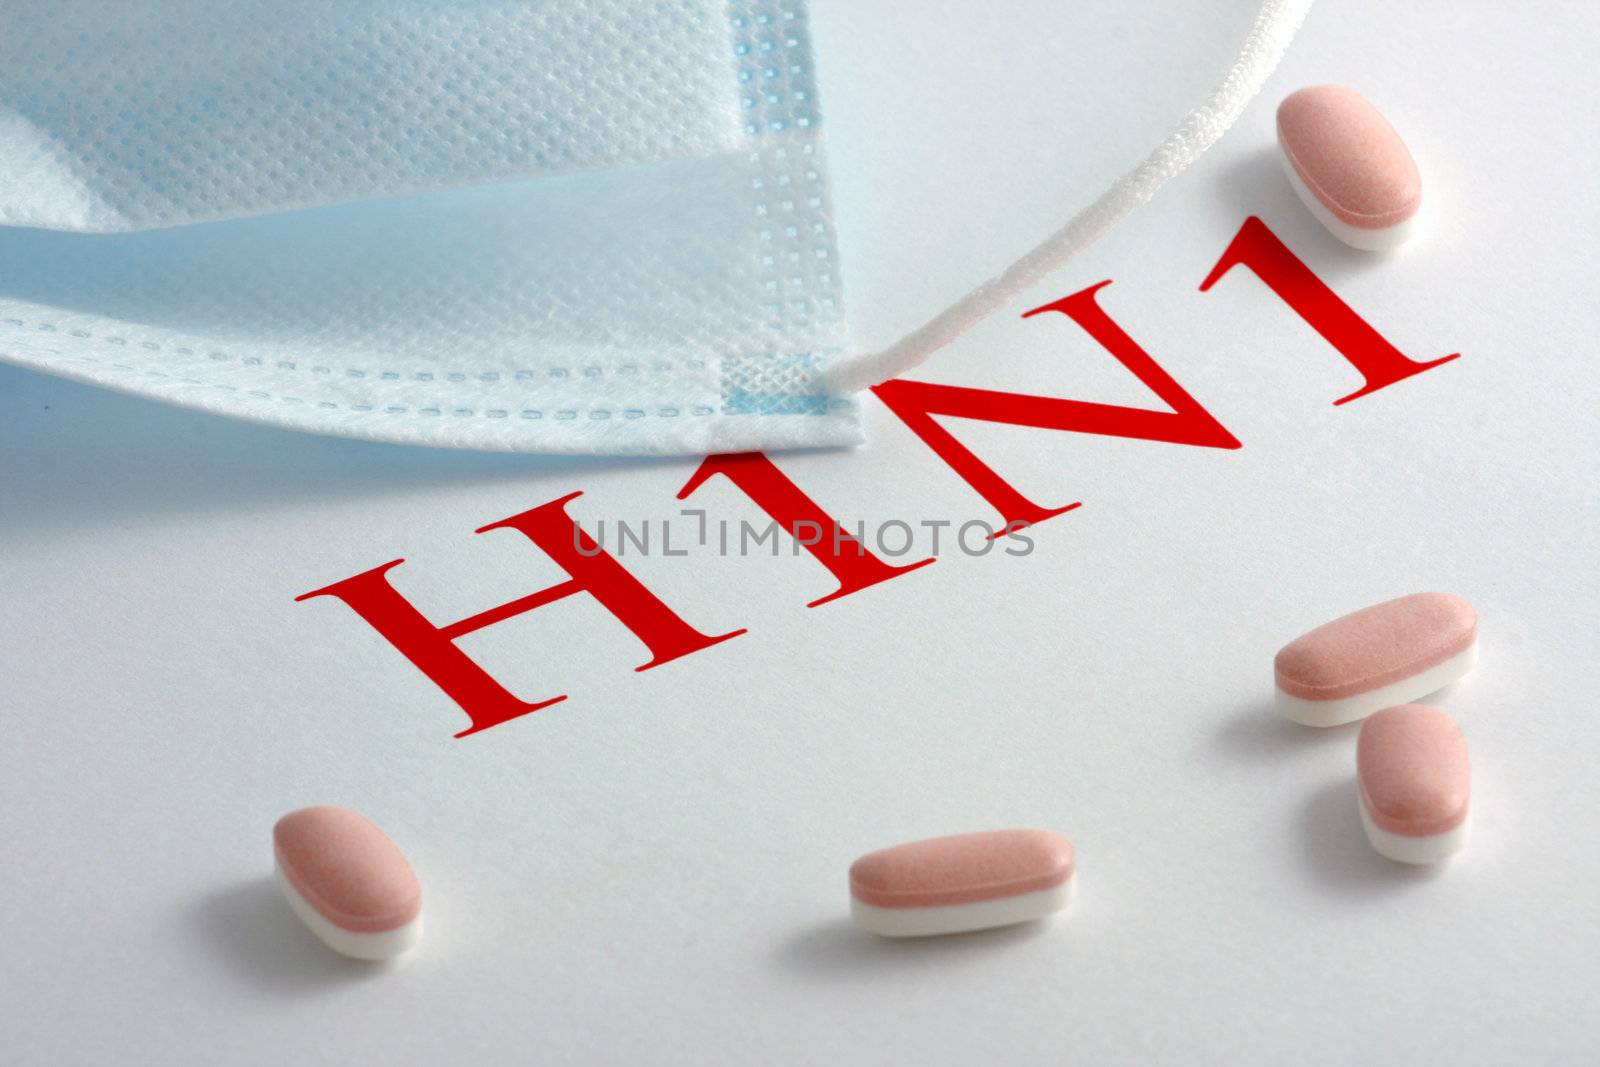 Images of the H1N1 Influenza Virus